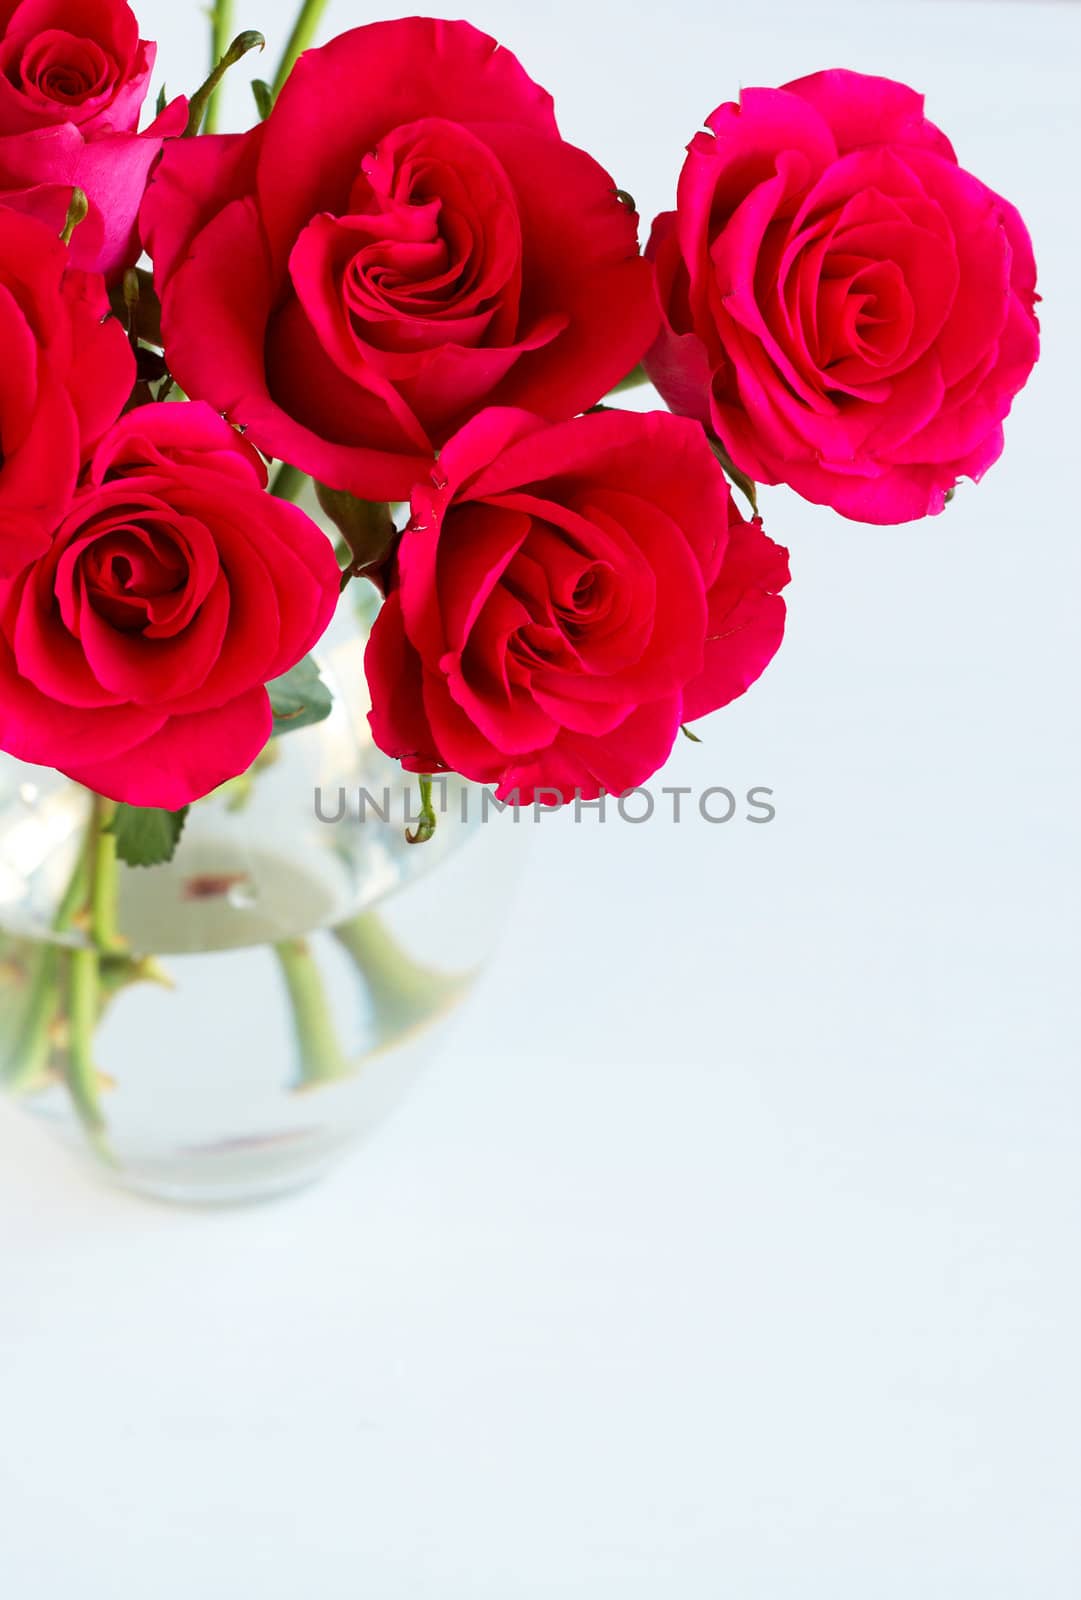 Bunch of pink roses in a glass vase on light background